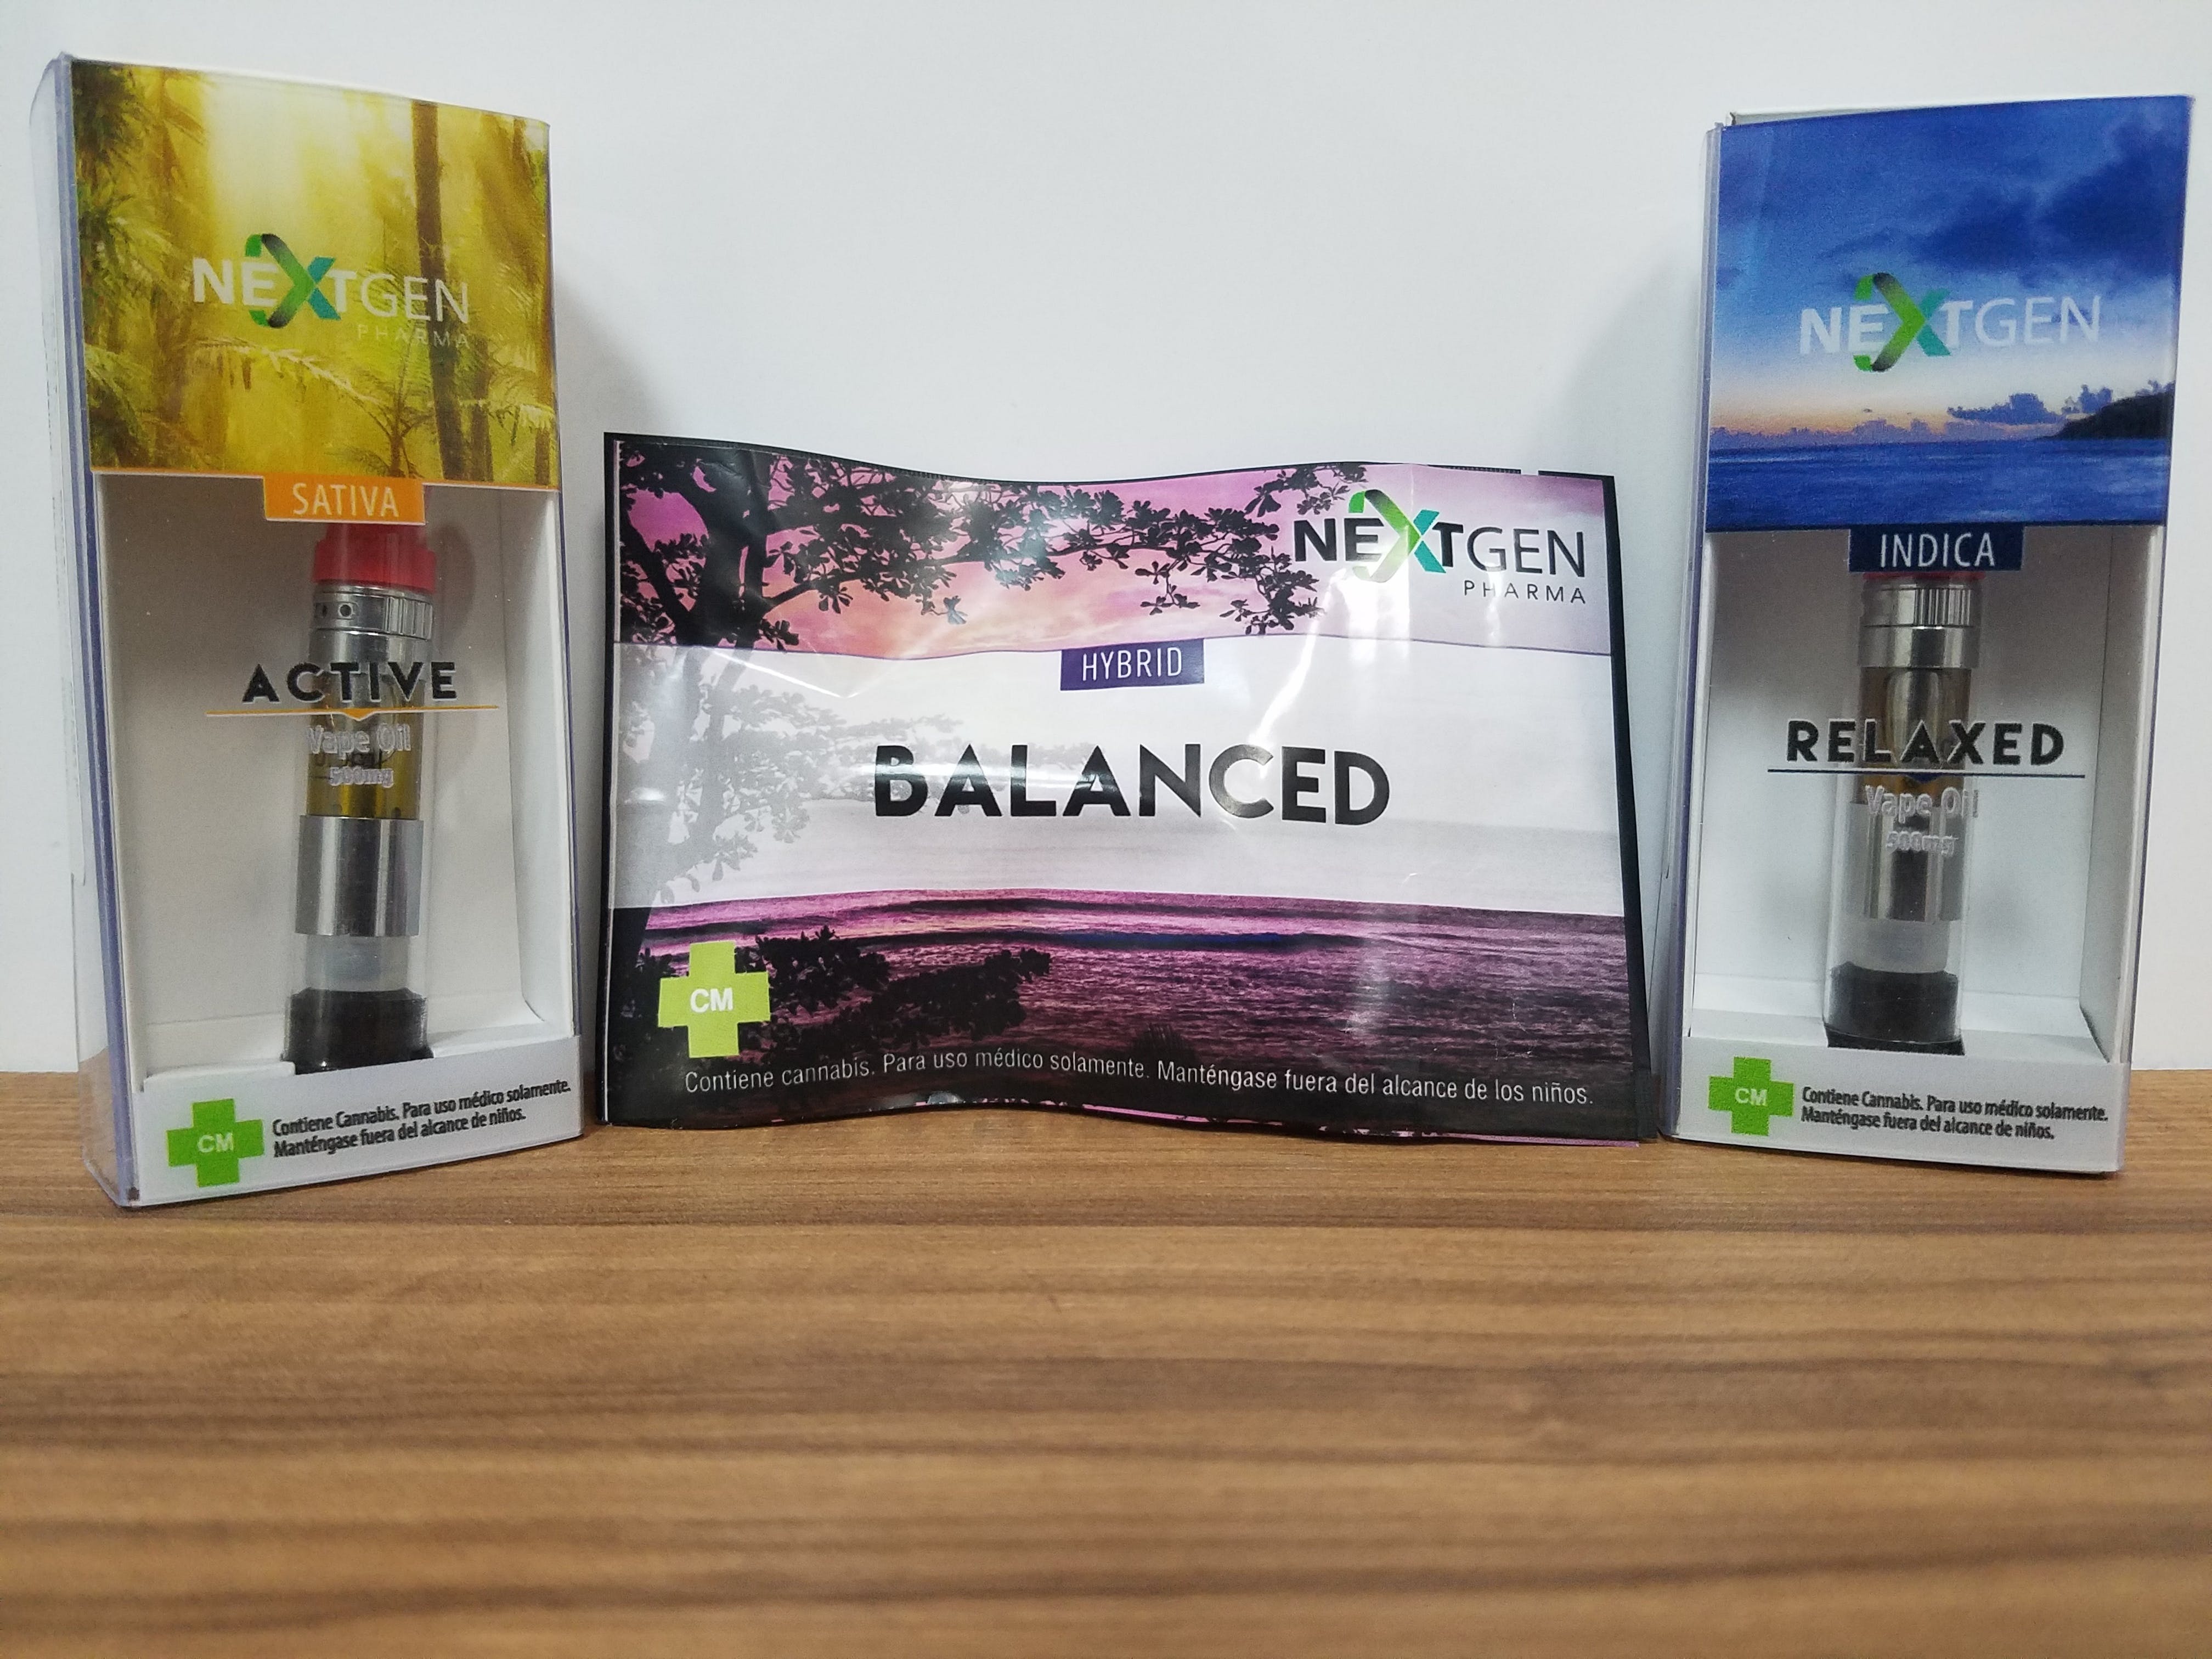 concentrate-active-sativa-co2-cartridge